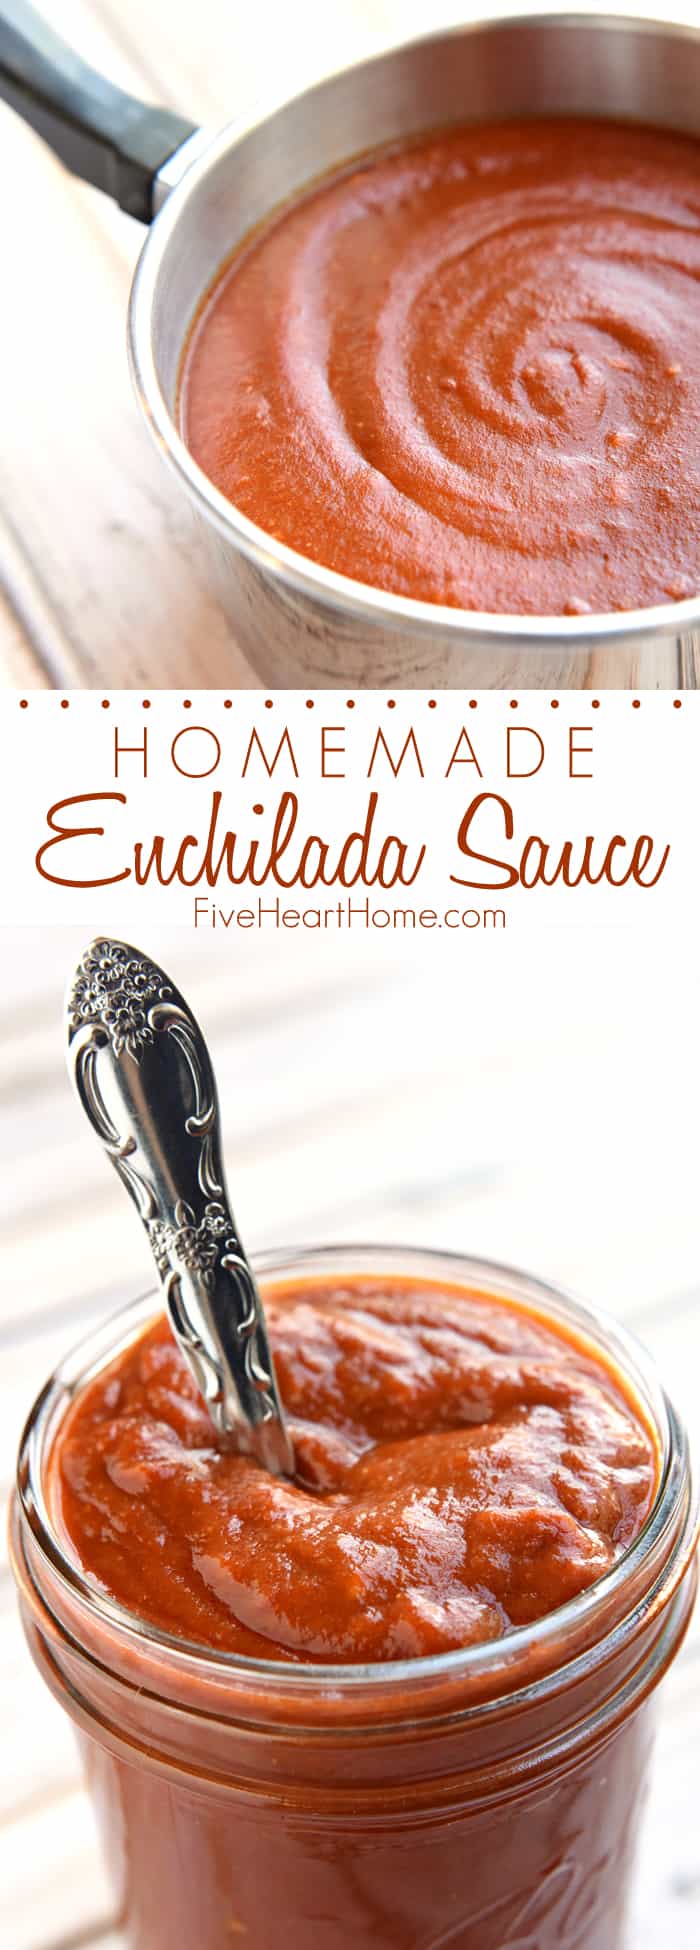 Homemade Red Enchilada Sauce ~ all-natural, quick and easy to make, full of flavor, and as mild or spicy as you prefer | FiveHeartHome.com via @fivehearthome